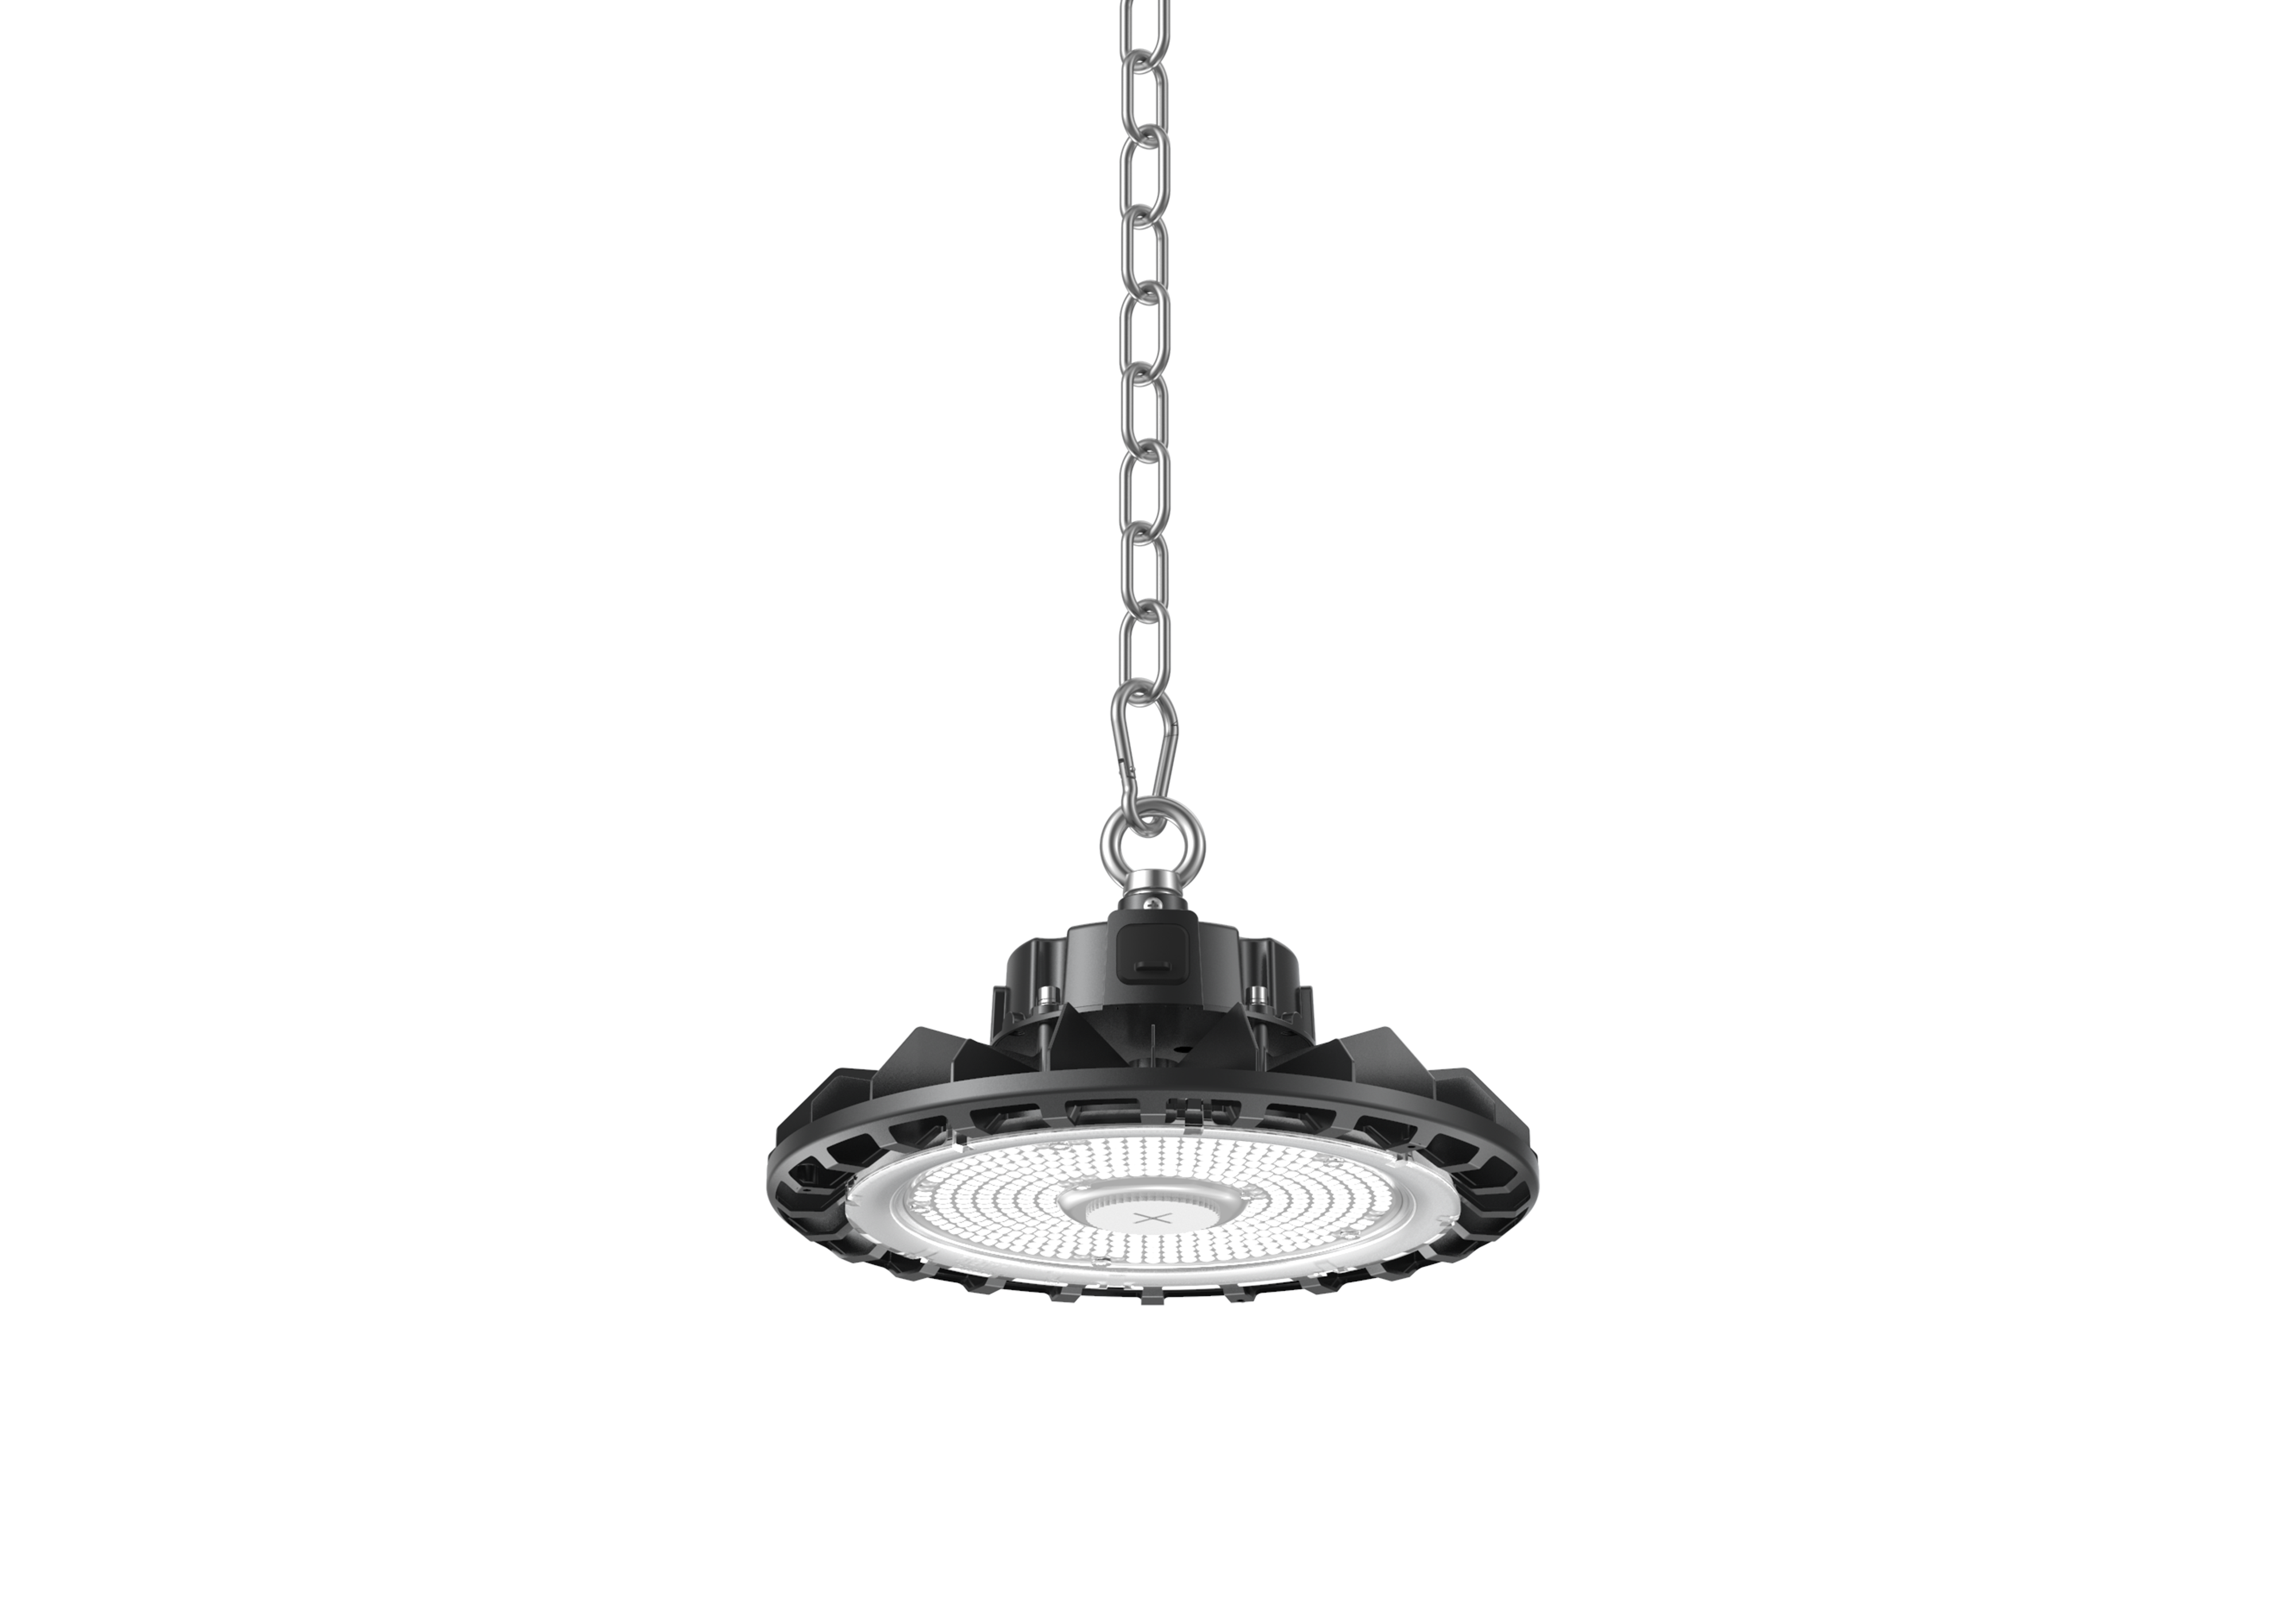 Highbay select plus light with safety chain